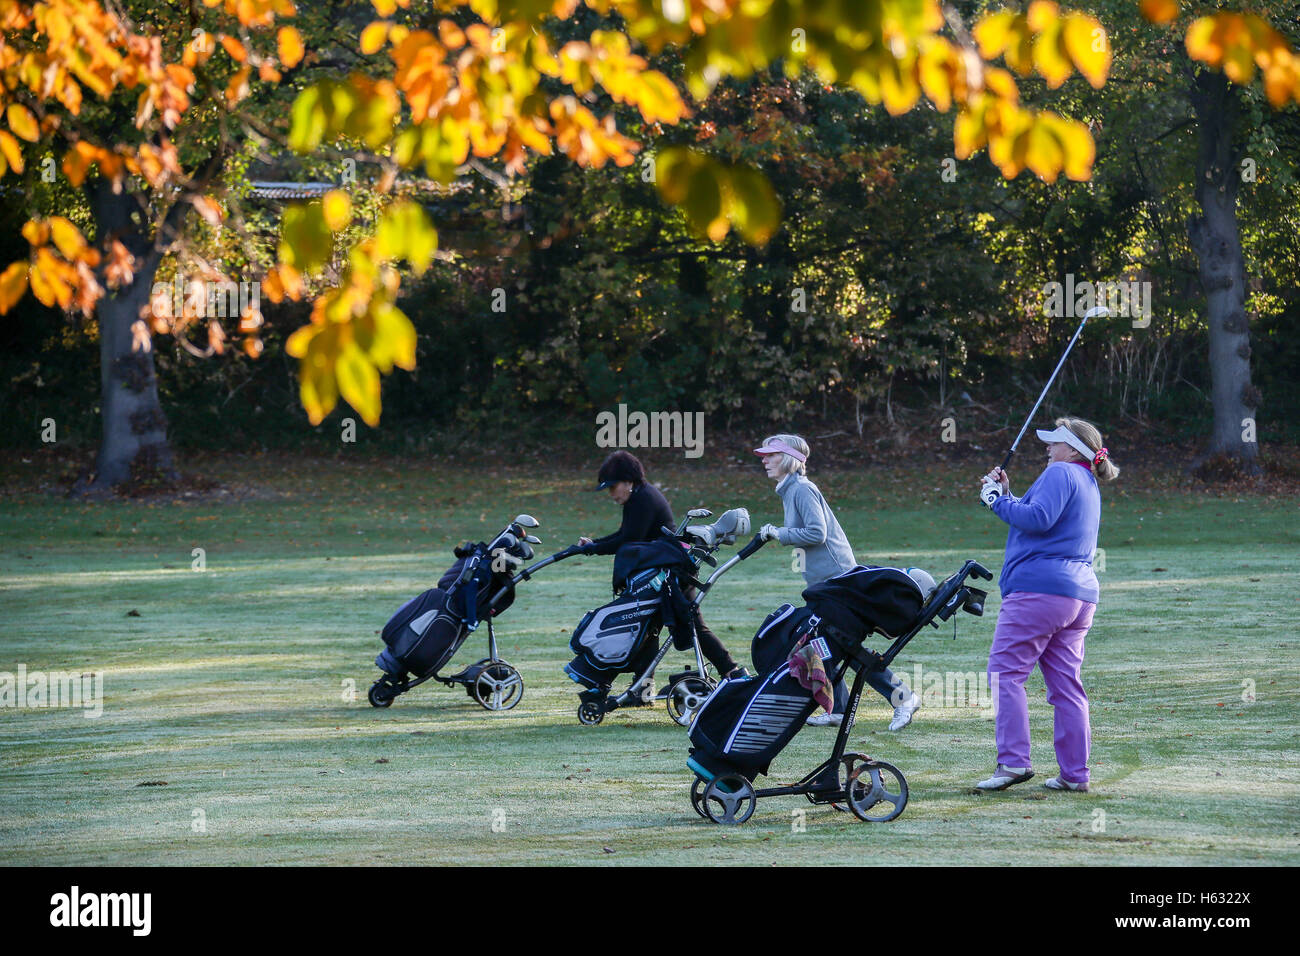 Autumnal scenes of golfers playing on Brent Valley golf course in west London. Photo date: Sunday, October 23, 2016. Photo credi Stock Photo